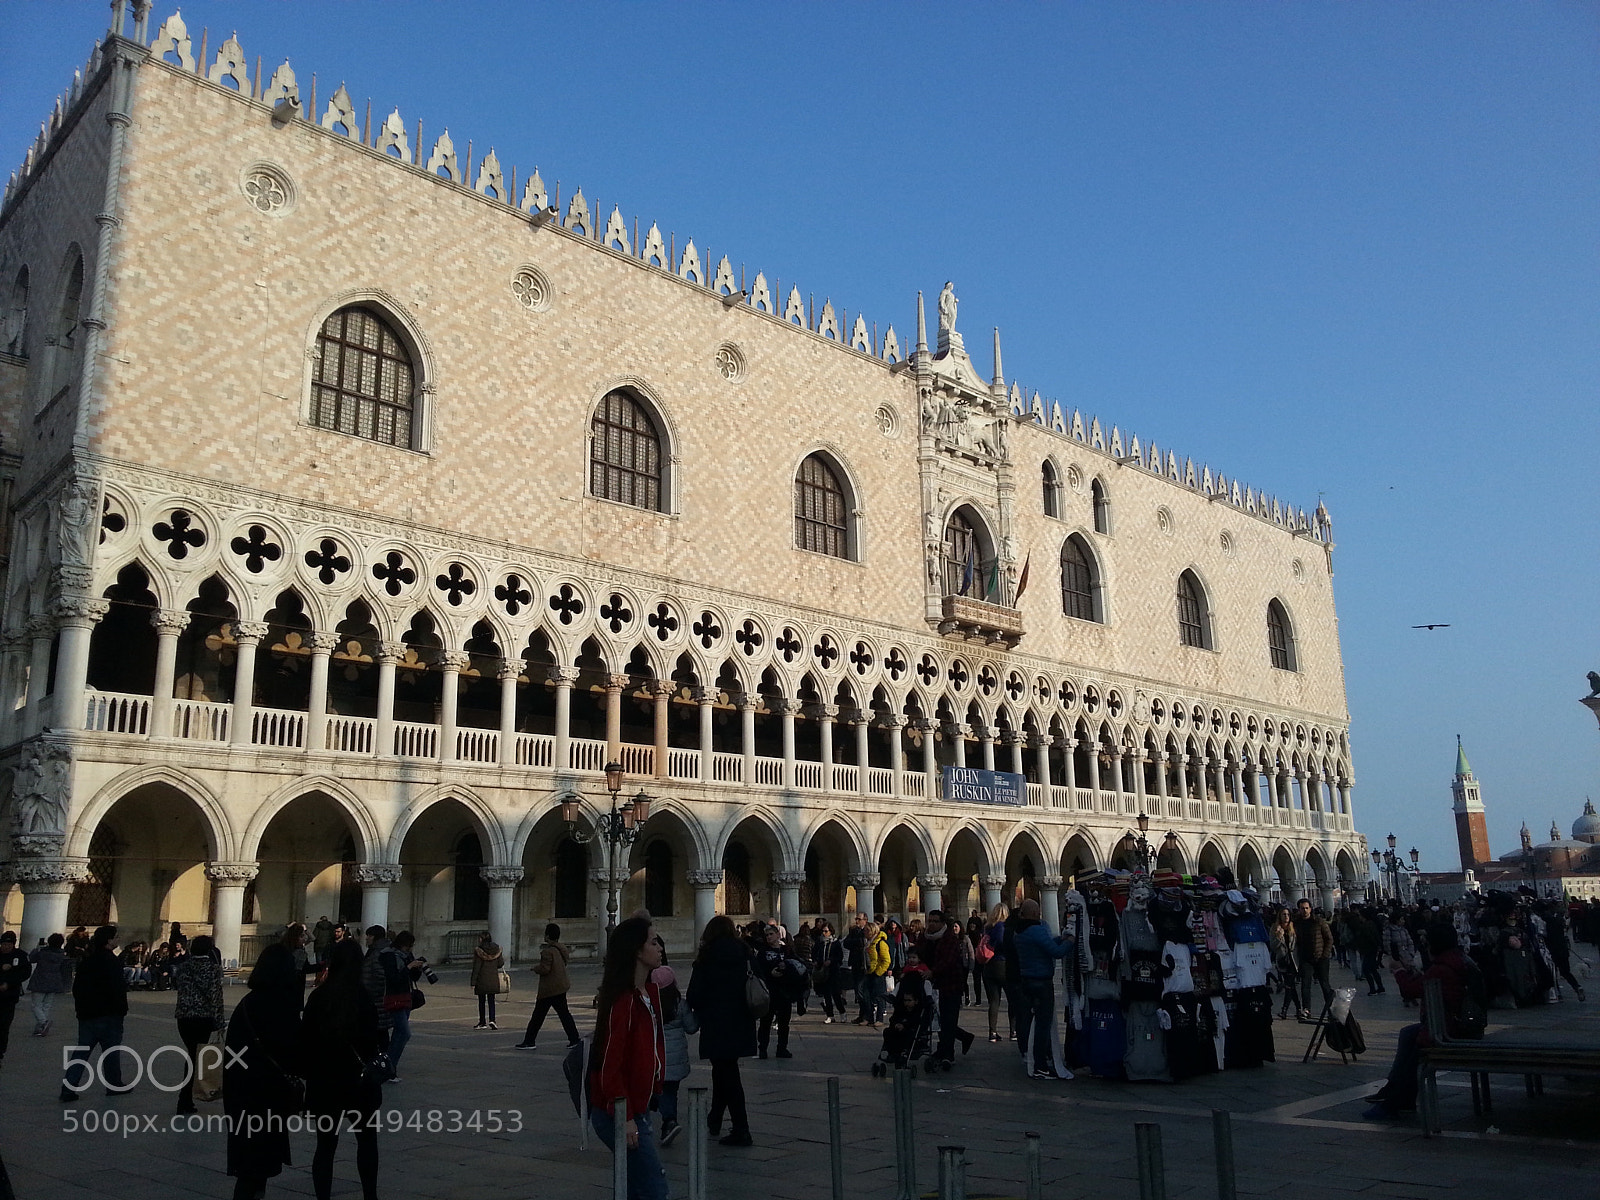 Samsung GT-I8750 sample photo. Palazzo ducale photography